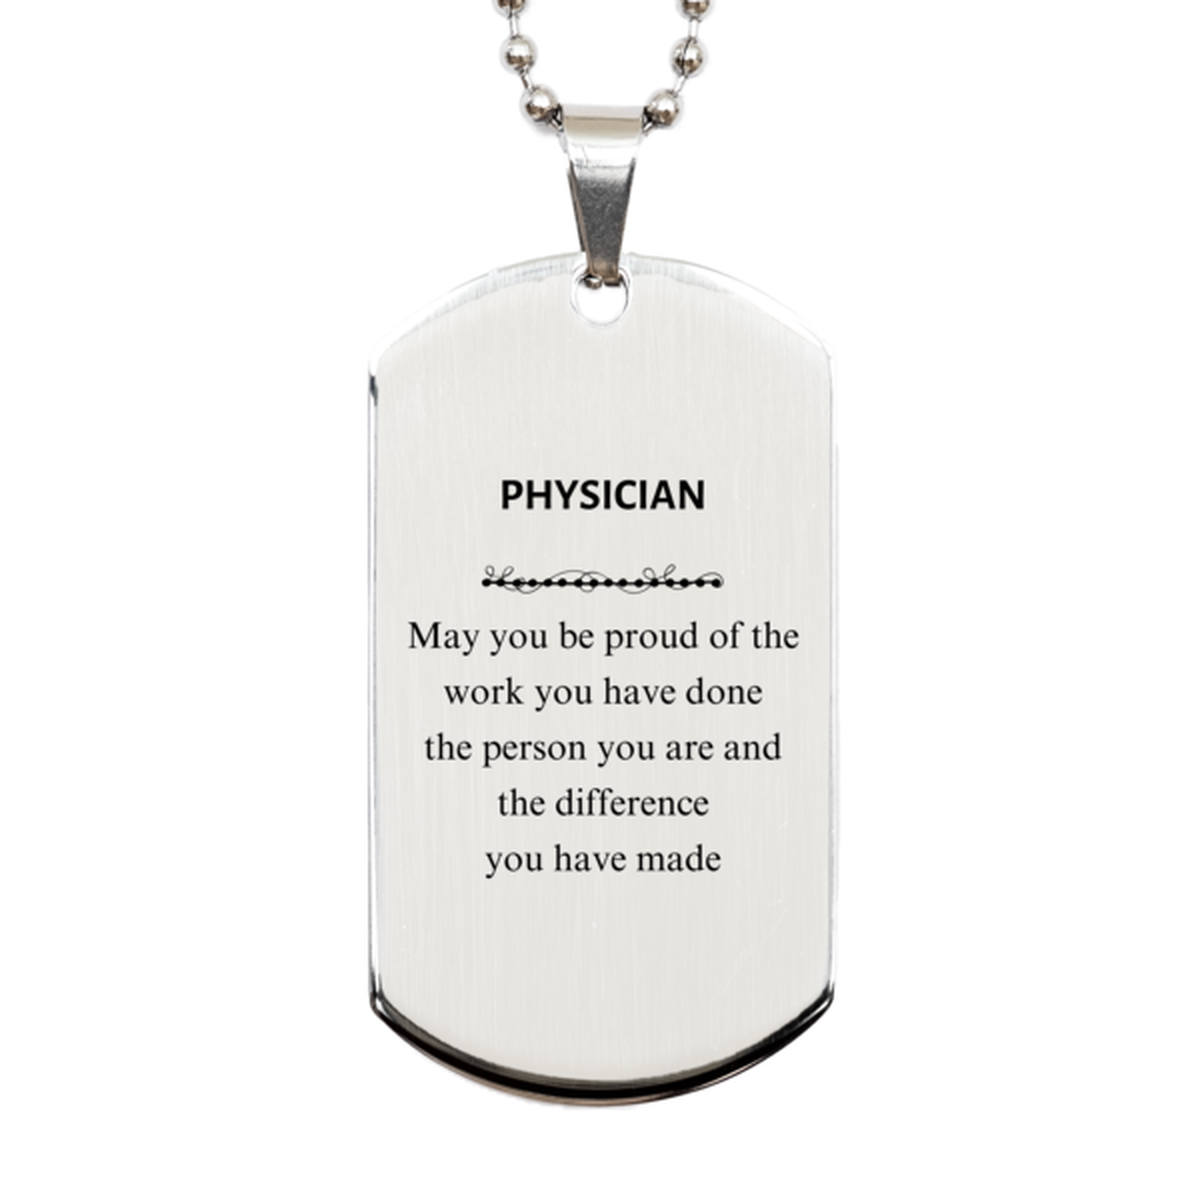 Physician May you be proud of the work you have done, Retirement Physician Silver Dog Tag for Colleague Appreciation Gifts Amazing for Physician